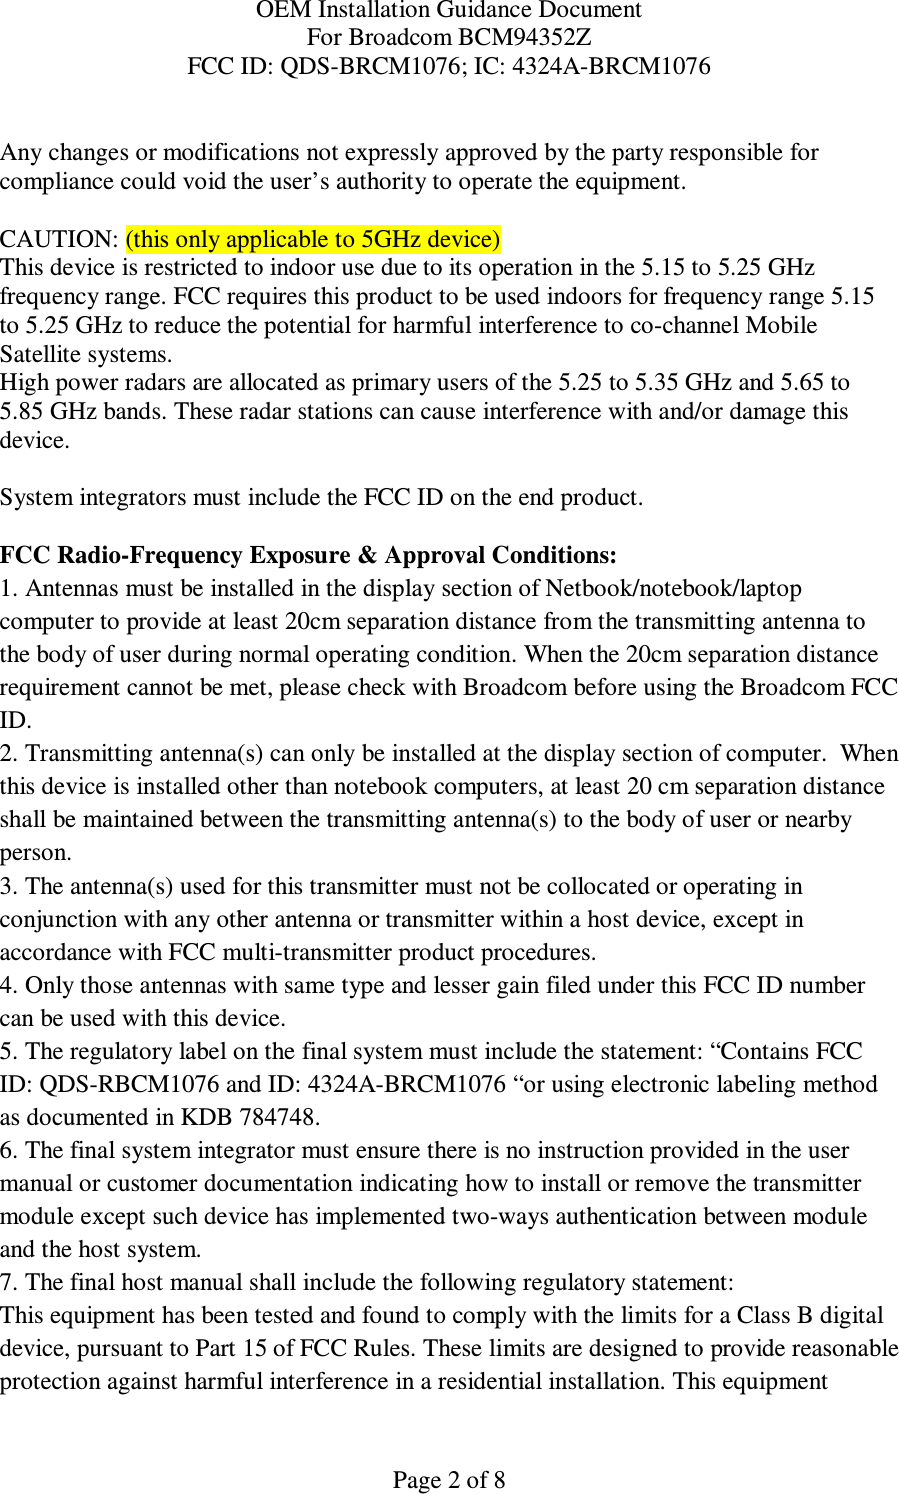 OEM Installation Guidance Document For Broadcom BCM94352Z FCC ID: QDS-BRCM1076; IC: 4324A-BRCM1076  Page 2 of 8  Any changes or modifications not expressly approved by the party responsible for compliance could void the user’s authority to operate the equipment.  CAUTION: (this only applicable to 5GHz device) This device is restricted to indoor use due to its operation in the 5.15 to 5.25 GHz frequency range. FCC requires this product to be used indoors for frequency range 5.15 to 5.25 GHz to reduce the potential for harmful interference to co-channel Mobile Satellite systems. High power radars are allocated as primary users of the 5.25 to 5.35 GHz and 5.65 to 5.85 GHz bands. These radar stations can cause interference with and/or damage this device.  System integrators must include the FCC ID on the end product.   FCC Radio-Frequency Exposure &amp; Approval Conditions: 1. Antennas must be installed in the display section of Netbook/notebook/laptop computer to provide at least 20cm separation distance from the transmitting antenna to the body of user during normal operating condition. When the 20cm separation distance requirement cannot be met, please check with Broadcom before using the Broadcom FCC ID.  2. Transmitting antenna(s) can only be installed at the display section of computer.  When this device is installed other than notebook computers, at least 20 cm separation distance shall be maintained between the transmitting antenna(s) to the body of user or nearby person. 3. The antenna(s) used for this transmitter must not be collocated or operating in conjunction with any other antenna or transmitter within a host device, except in accordance with FCC multi-transmitter product procedures. 4. Only those antennas with same type and lesser gain filed under this FCC ID number can be used with this device. 5. The regulatory label on the final system must include the statement: “Contains FCC ID: QDS-RBCM1076 and ID: 4324A-BRCM1076 “or using electronic labeling method as documented in KDB 784748. 6. The final system integrator must ensure there is no instruction provided in the user manual or customer documentation indicating how to install or remove the transmitter module except such device has implemented two-ways authentication between module and the host system. 7. The final host manual shall include the following regulatory statement: This equipment has been tested and found to comply with the limits for a Class B digital device, pursuant to Part 15 of FCC Rules. These limits are designed to provide reasonable protection against harmful interference in a residential installation. This equipment 